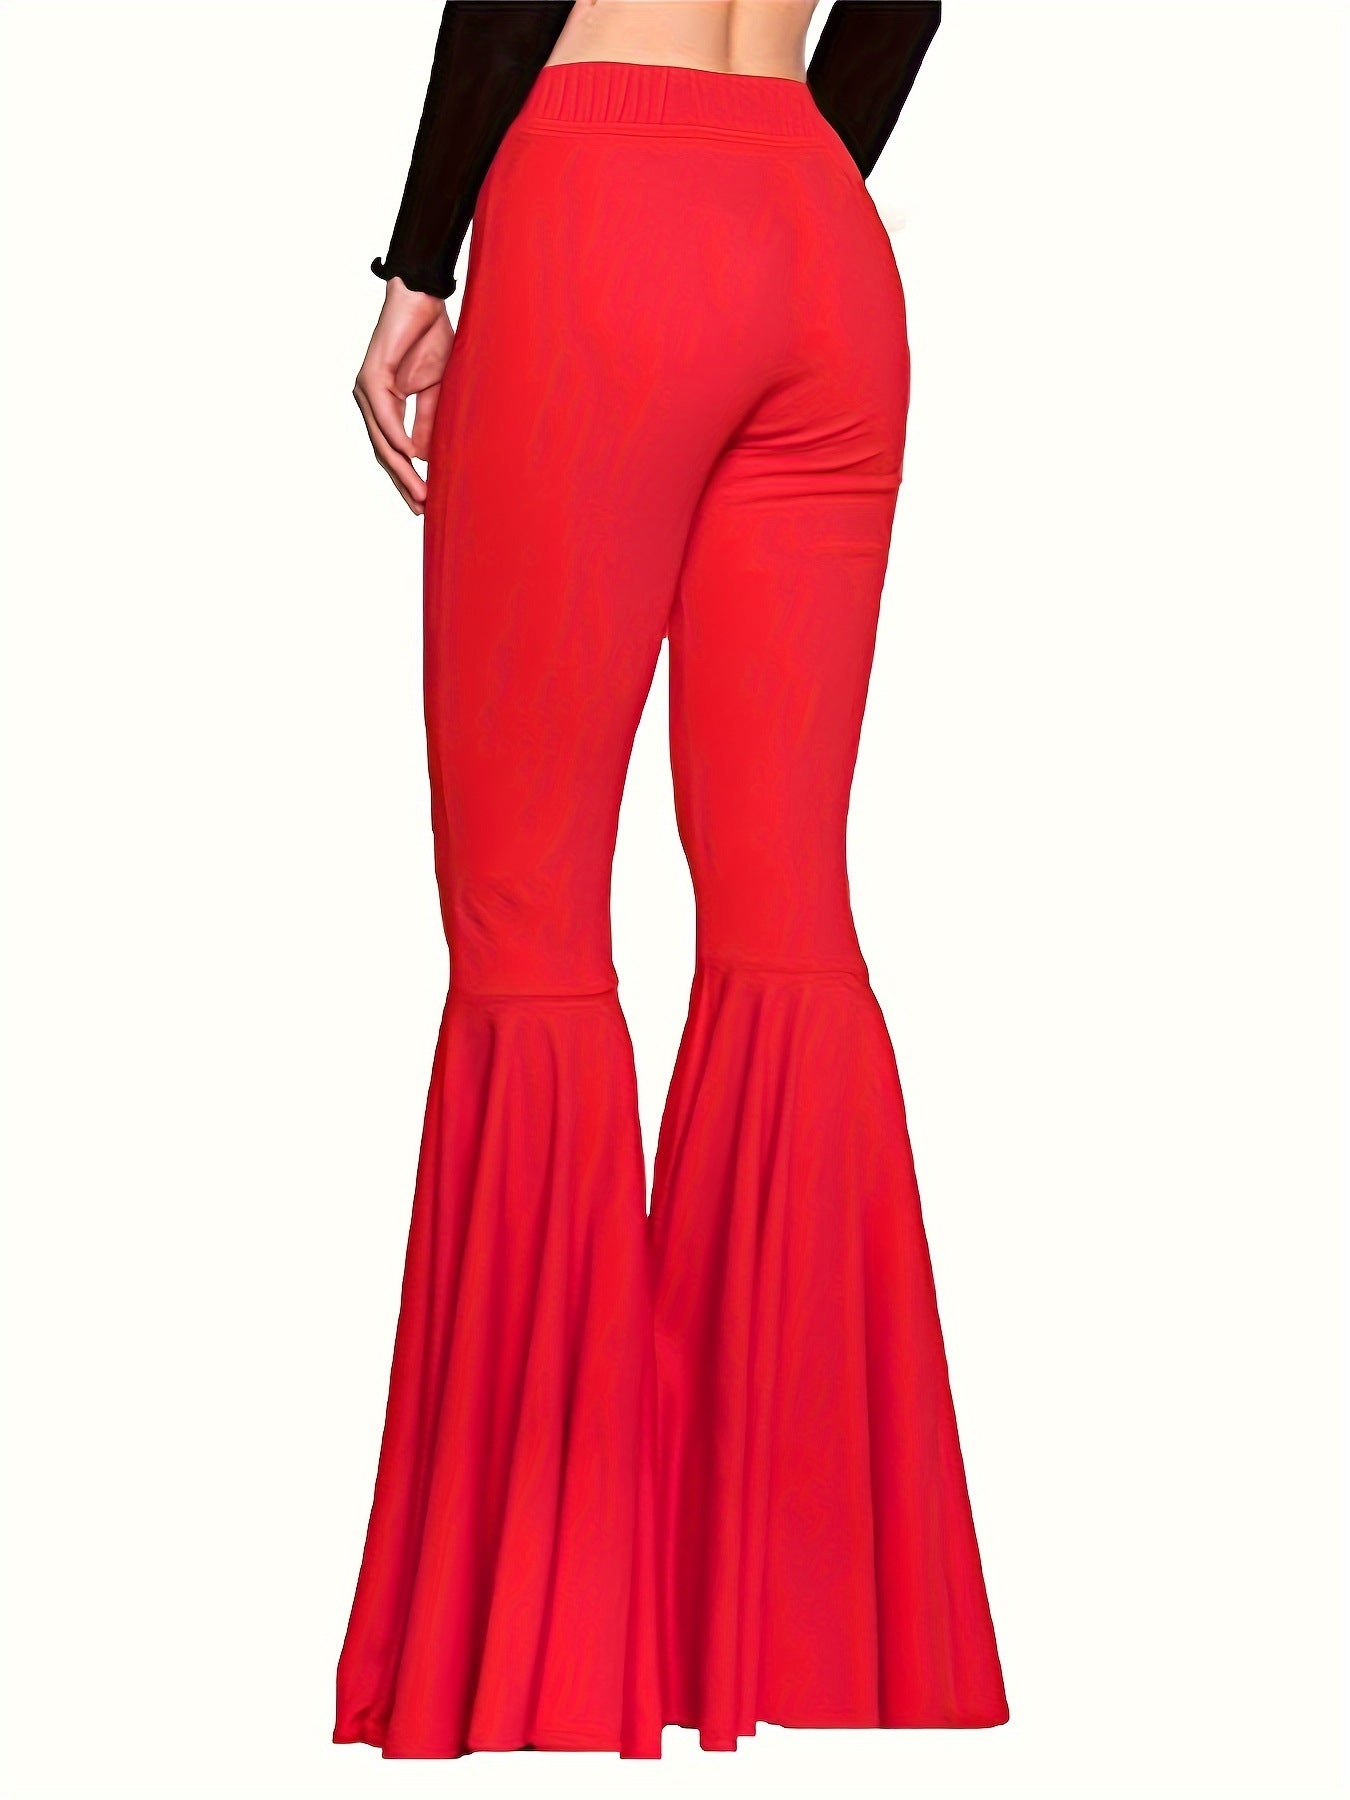 Women's Clothing Plus Size Loose Flared Pants